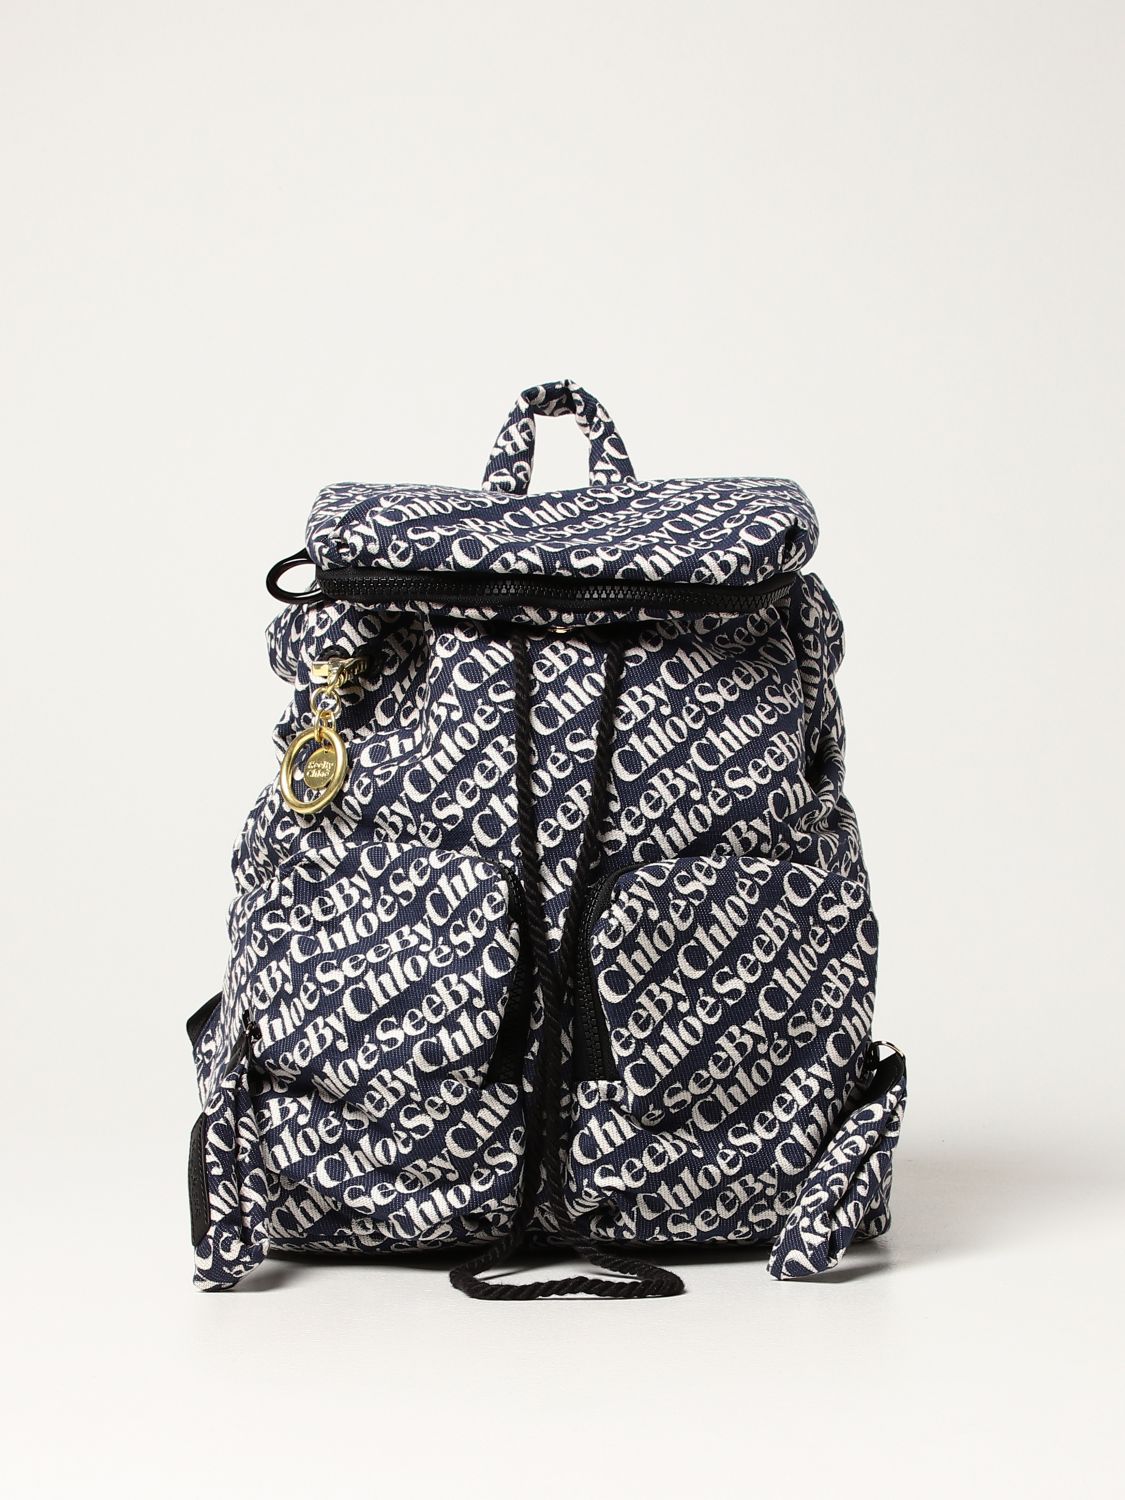 SEE BY CHLOÉ: Joy Rider backpack in logoed fabric | Backpack See 